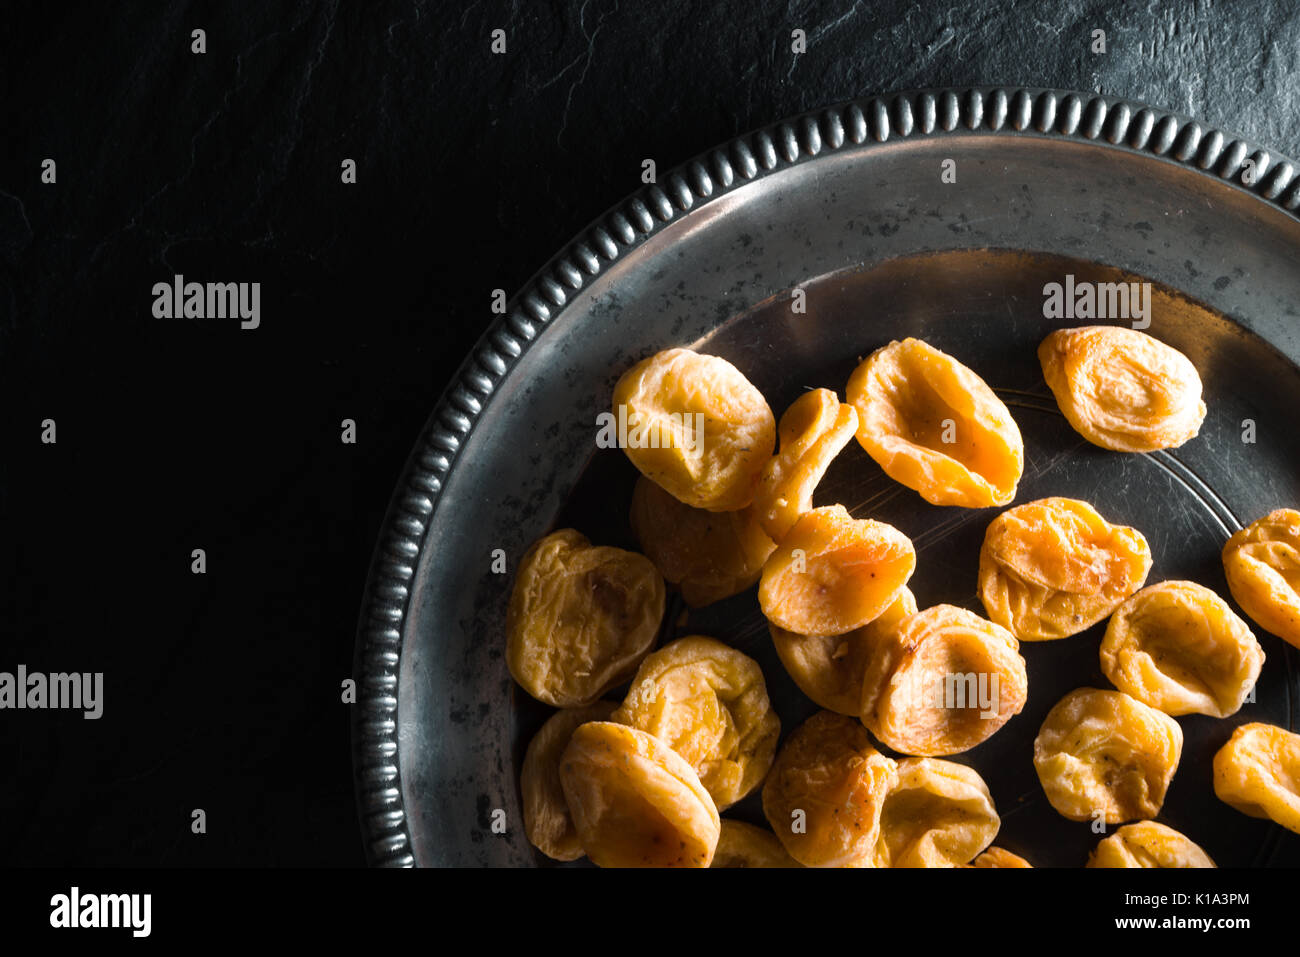 https://c8.alamy.com/comp/K1A3PM/dry-apricots-on-a-tin-plate-with-the-right-on-a-stone-table-horizontal-K1A3PM.jpg